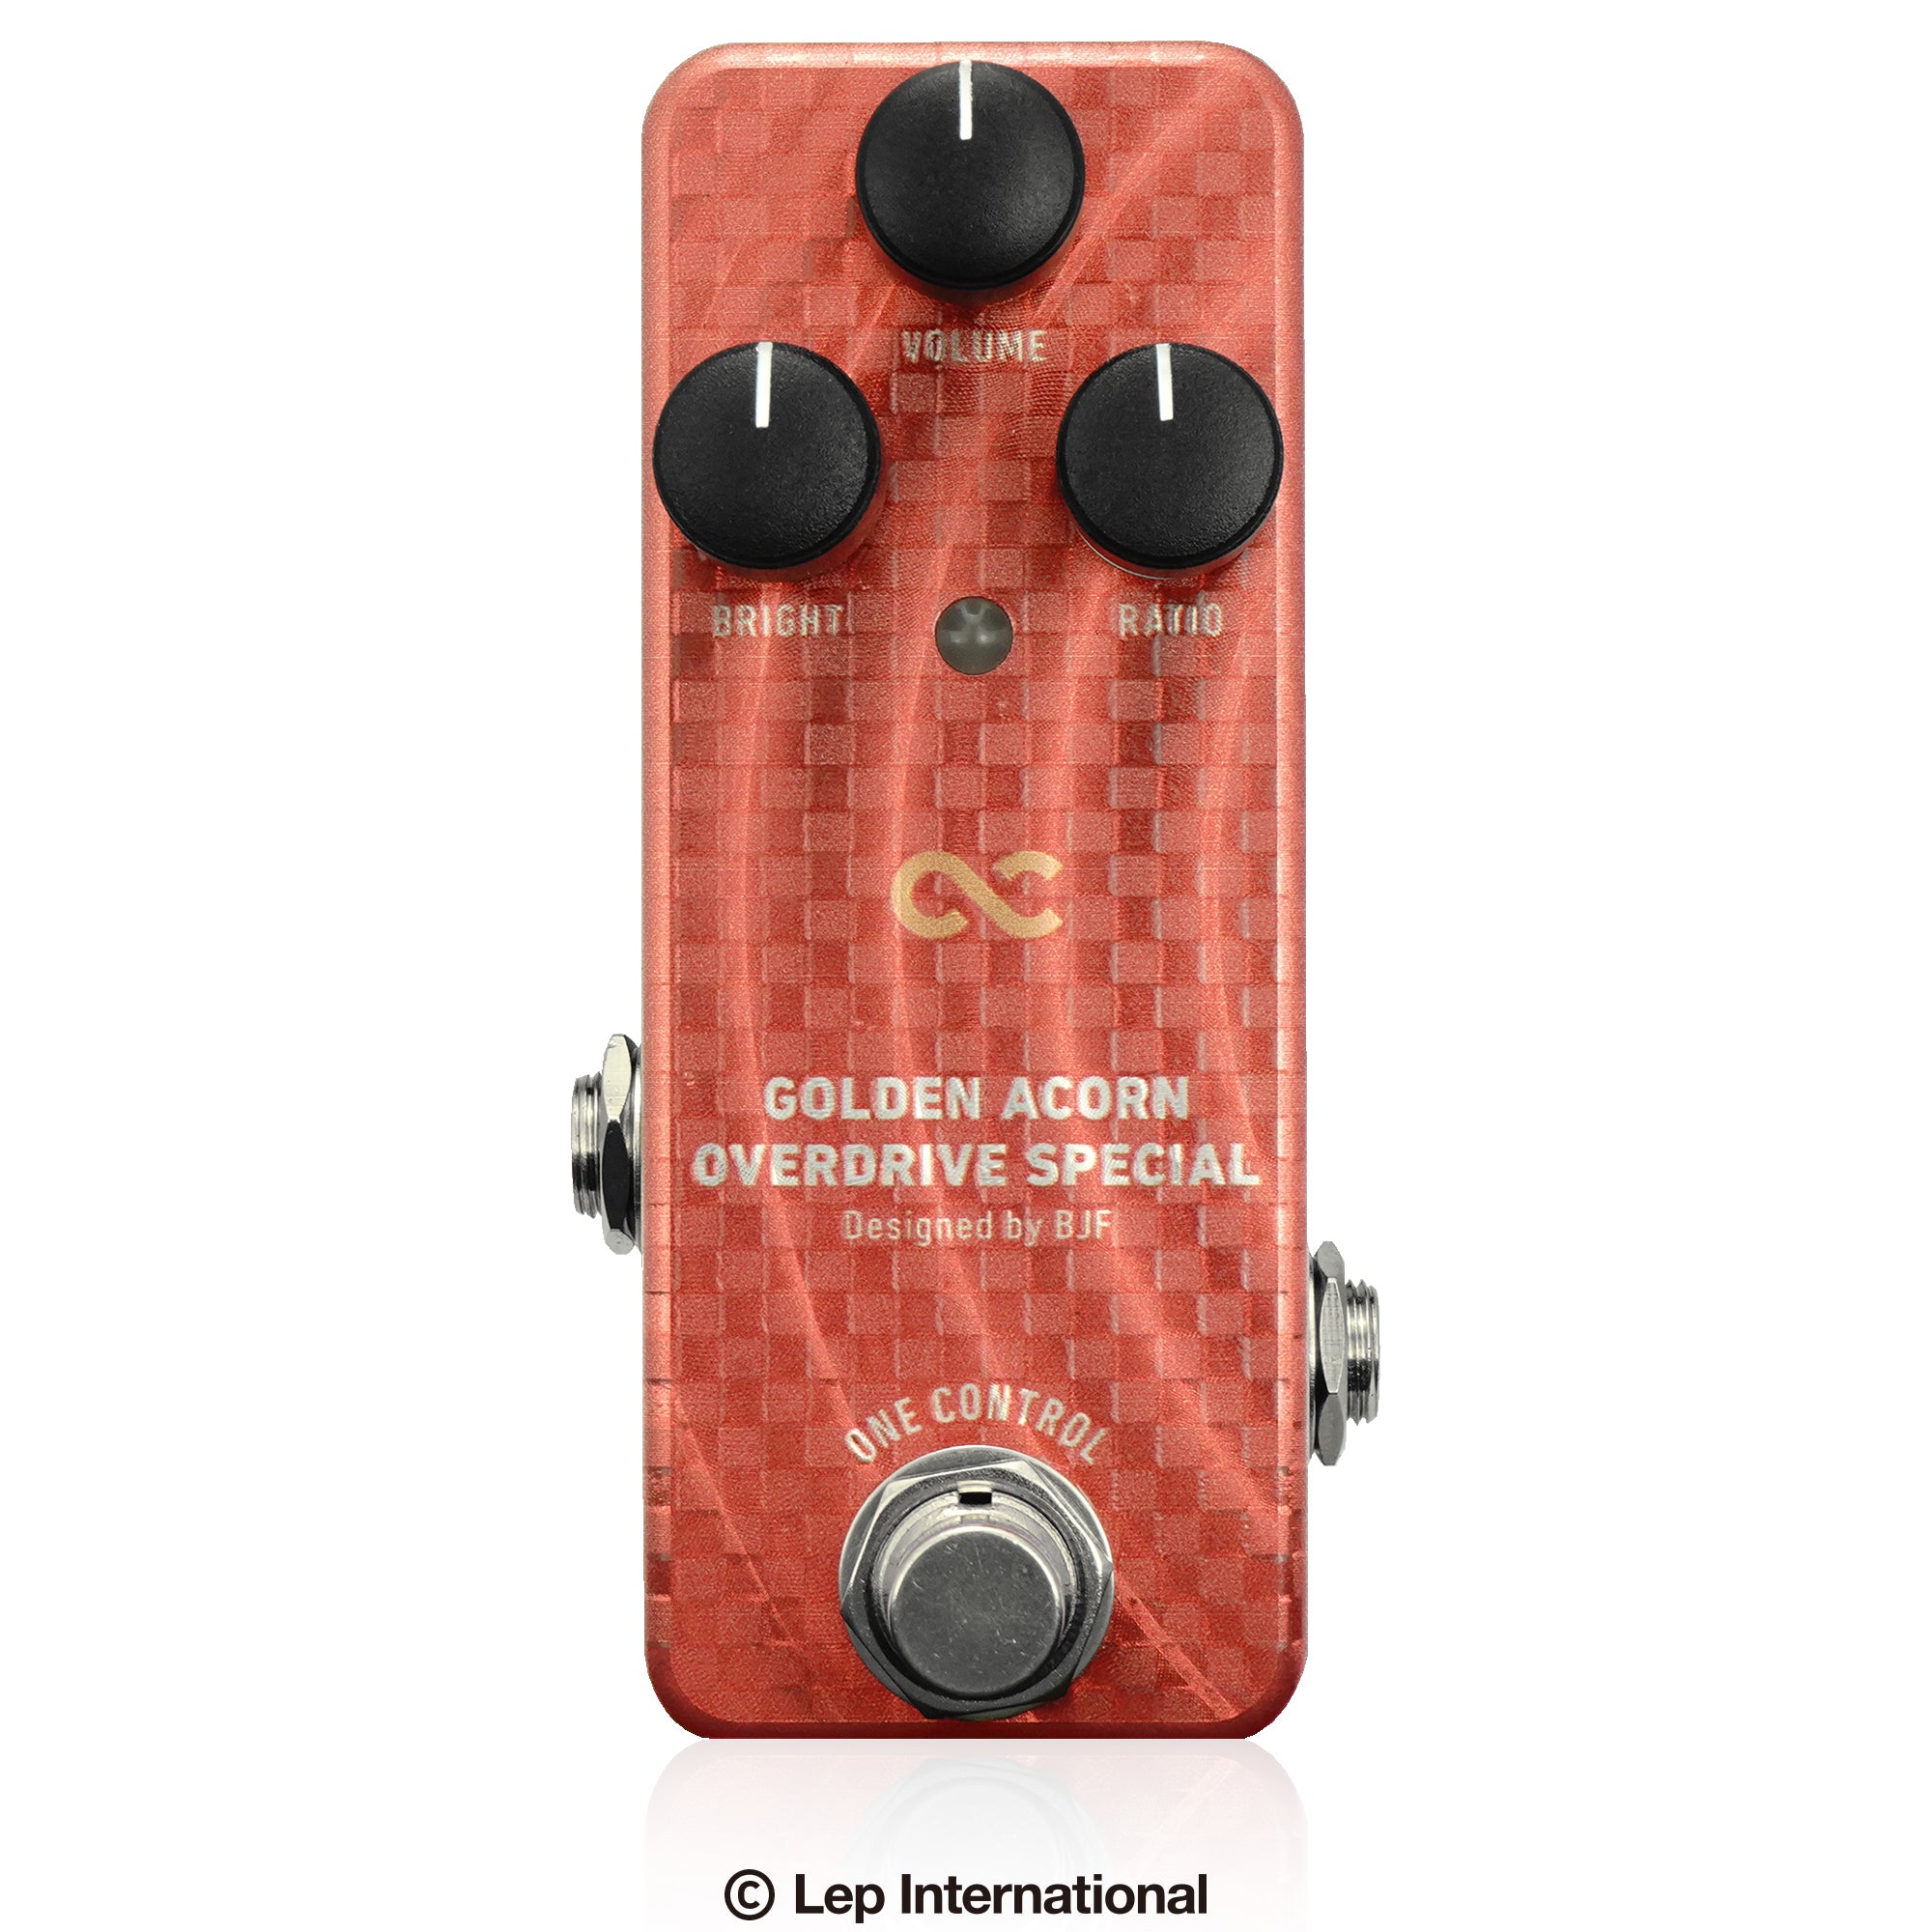 One Control GOLDEN ACORN OVERDRIVE SPECIAL – OneControl